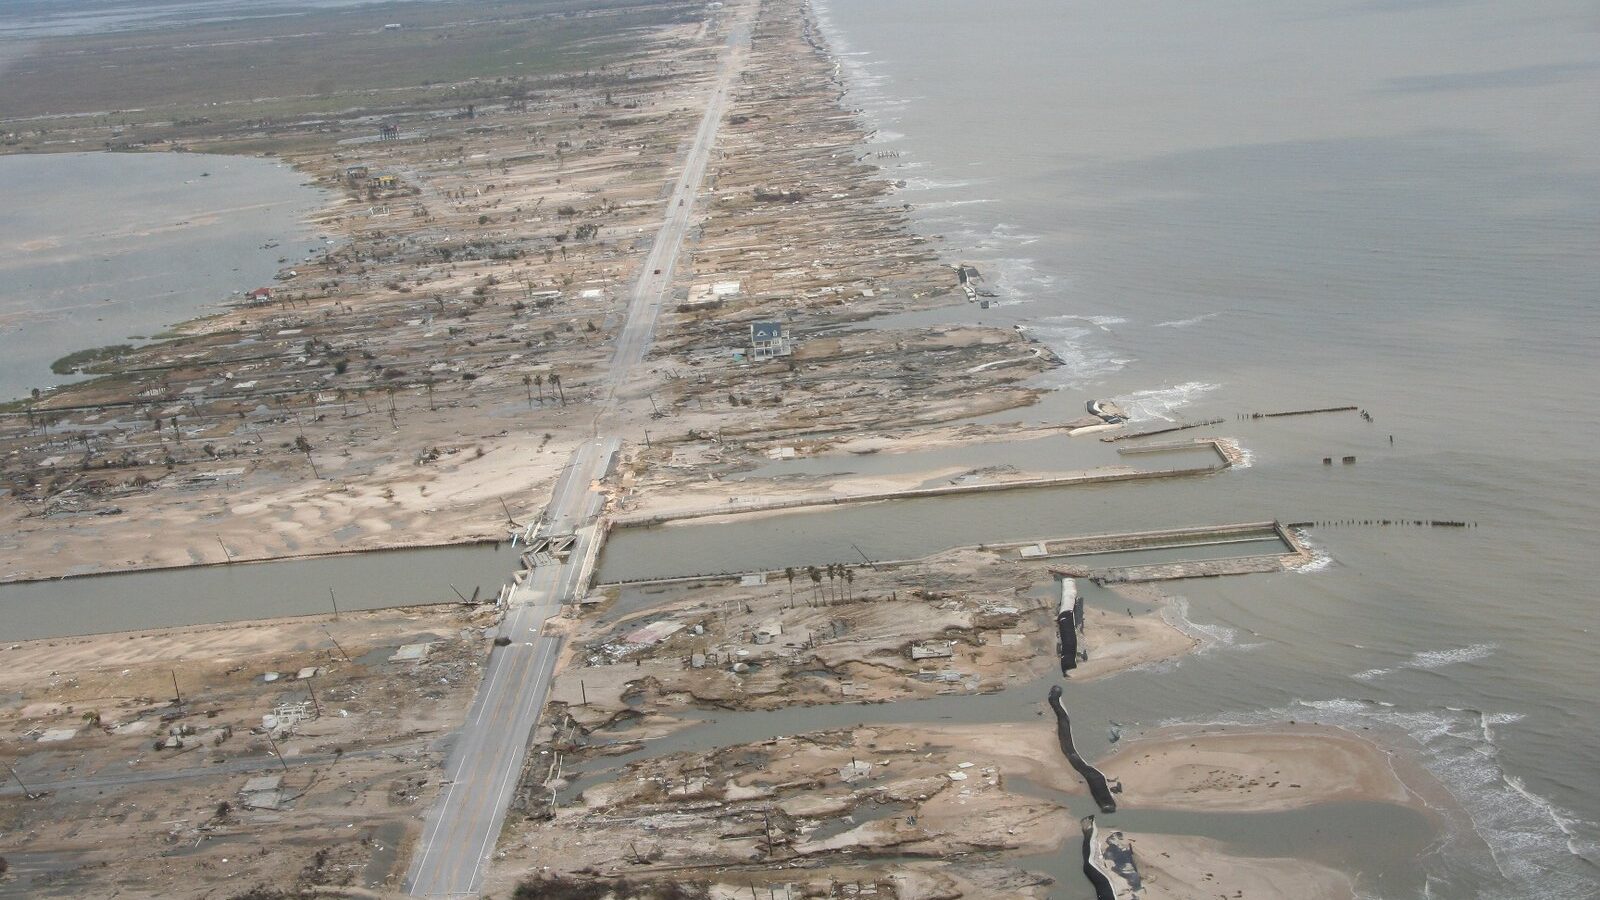 Aerial photo of a peninsula/barrier island that has been breached by a storm surge. Sand, buildings, and other structures have been washed away or damaged, including visible broken lines of sandbags, a damaged bridge, damaged trees, and obliterated buildings; only one house appears to still be standing.